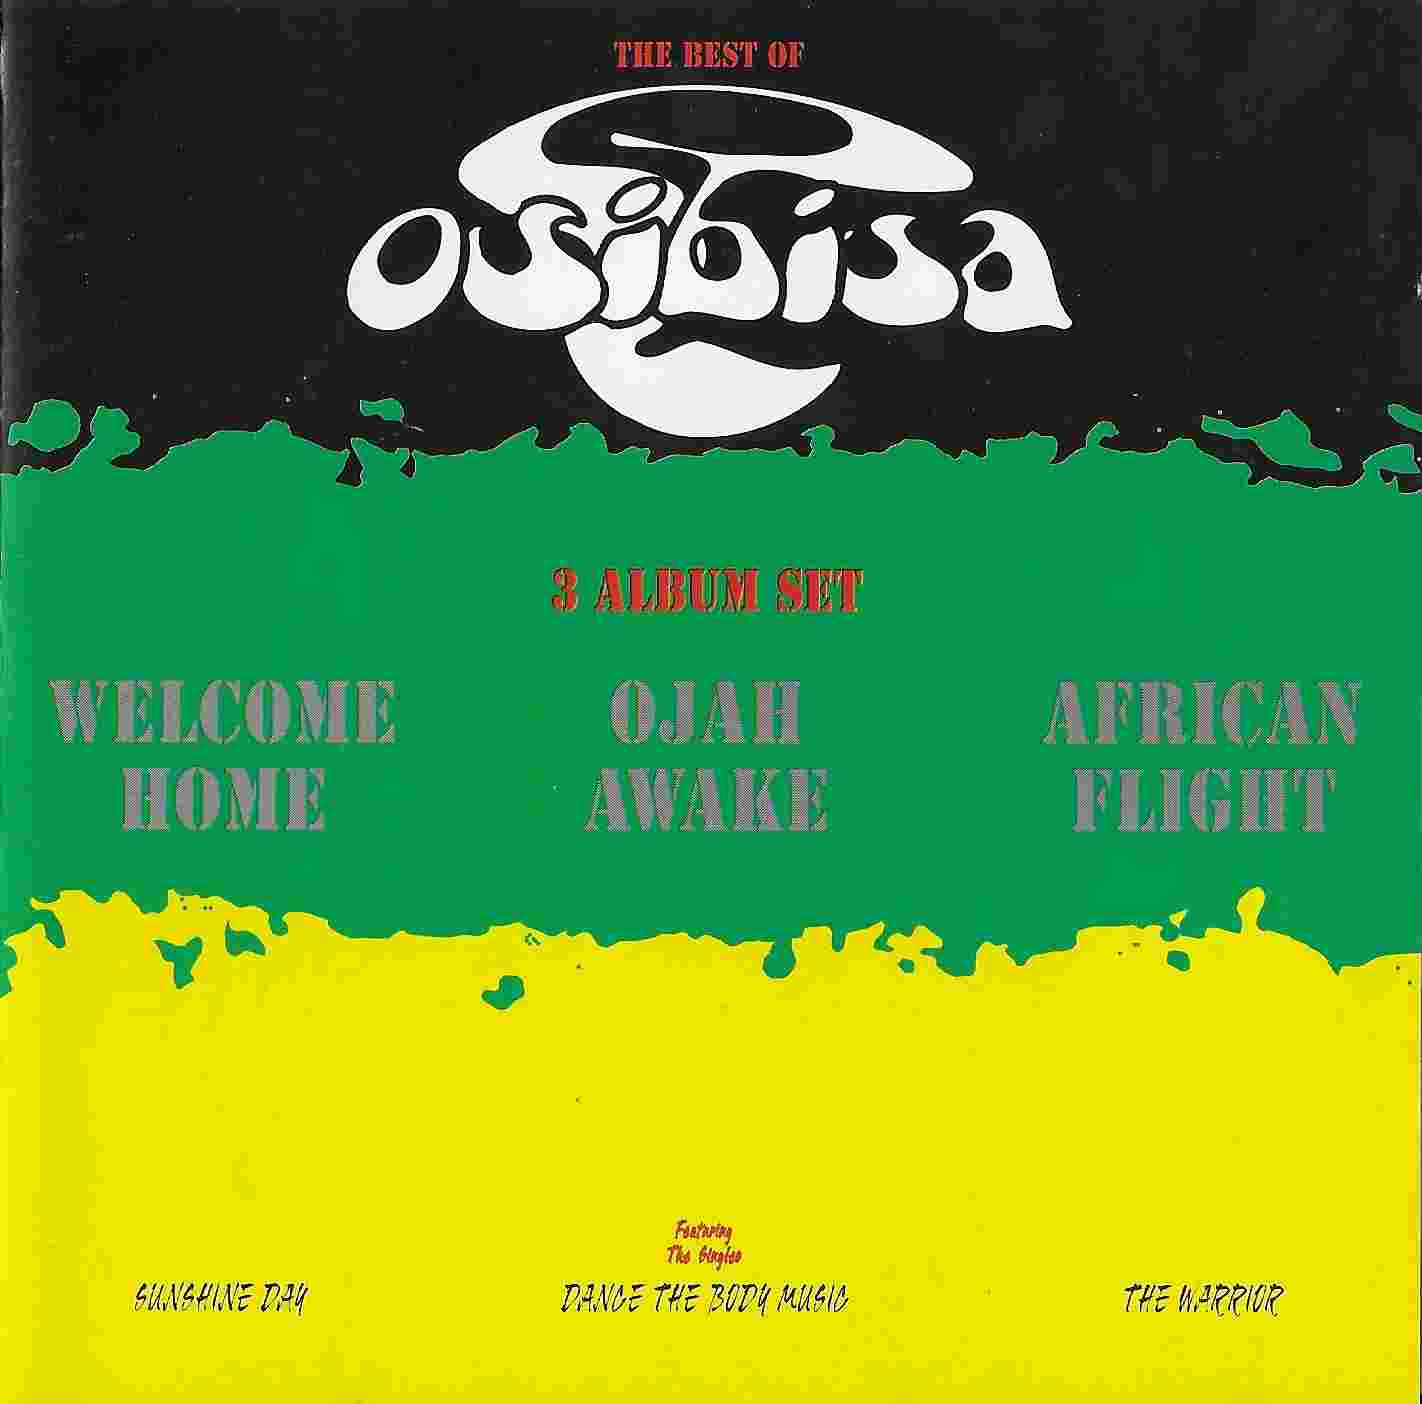 Picture of BBCCD2009 The best of Osibisa by artist Osibisa from the BBC cds - Records and Tapes library